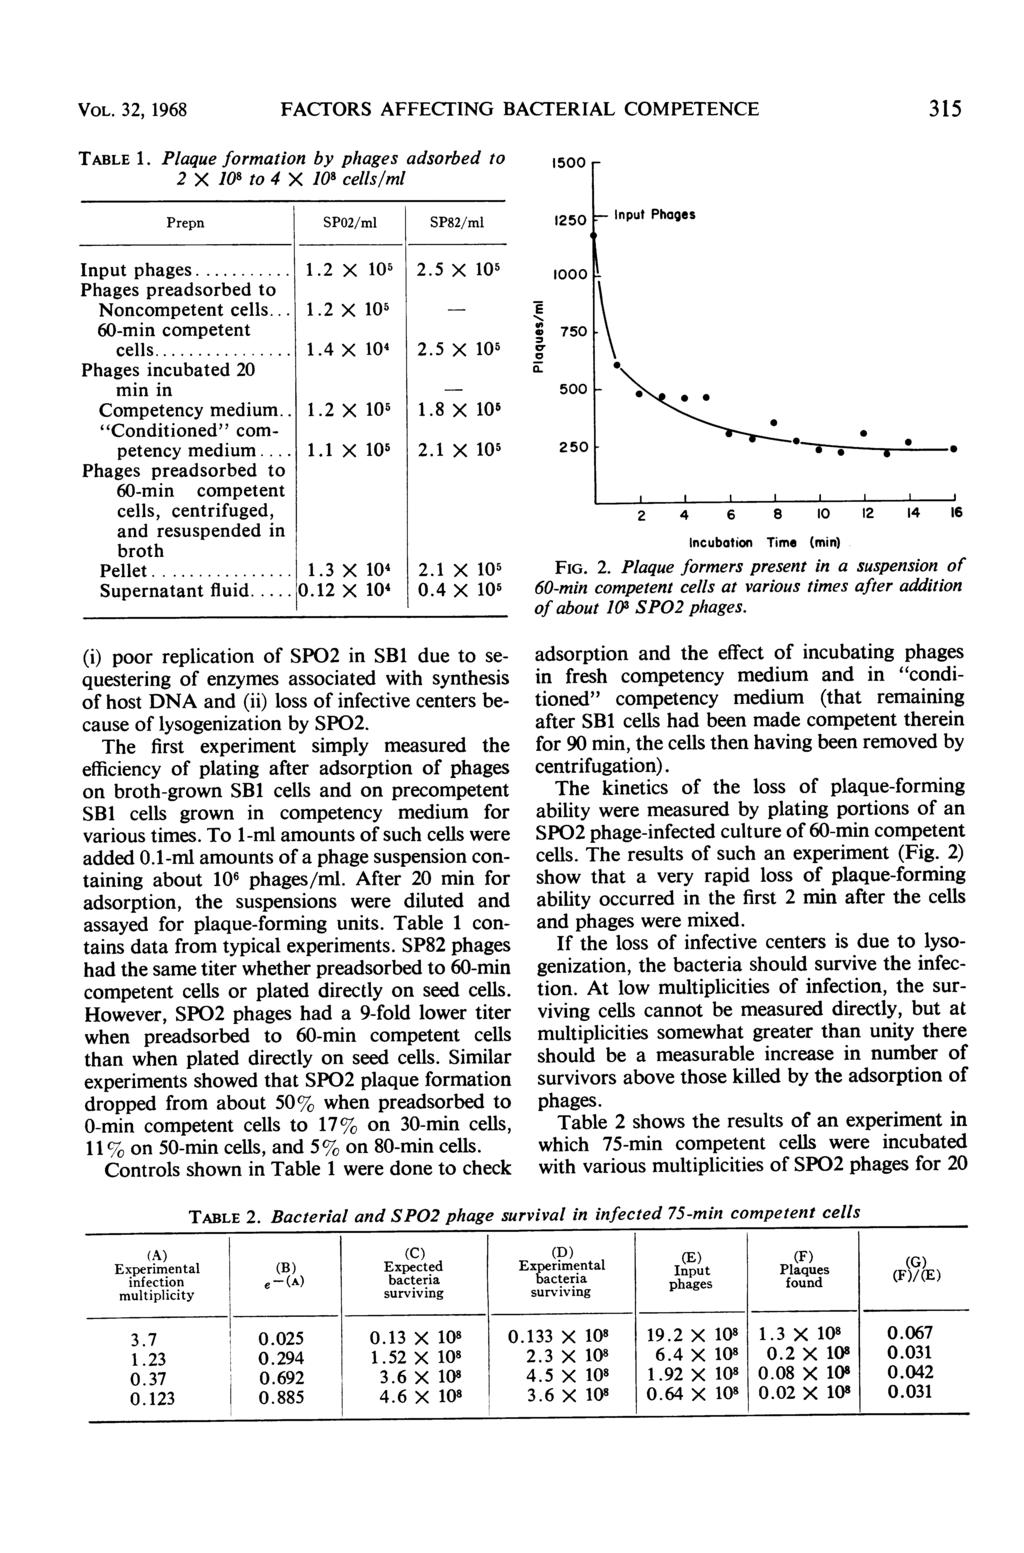 VOL. 32, 1968 FACTORS AFFECTING BACTERIAL COMPETENCE 315 TABLE 1. Plaque formation by phages adsorbed to 2 X 18 to 4 X 18 cells/ml 15 F Prepn SP2/ml Input phages... 1.2 X 15 Phages preadsorbed to Noncompetent cells.